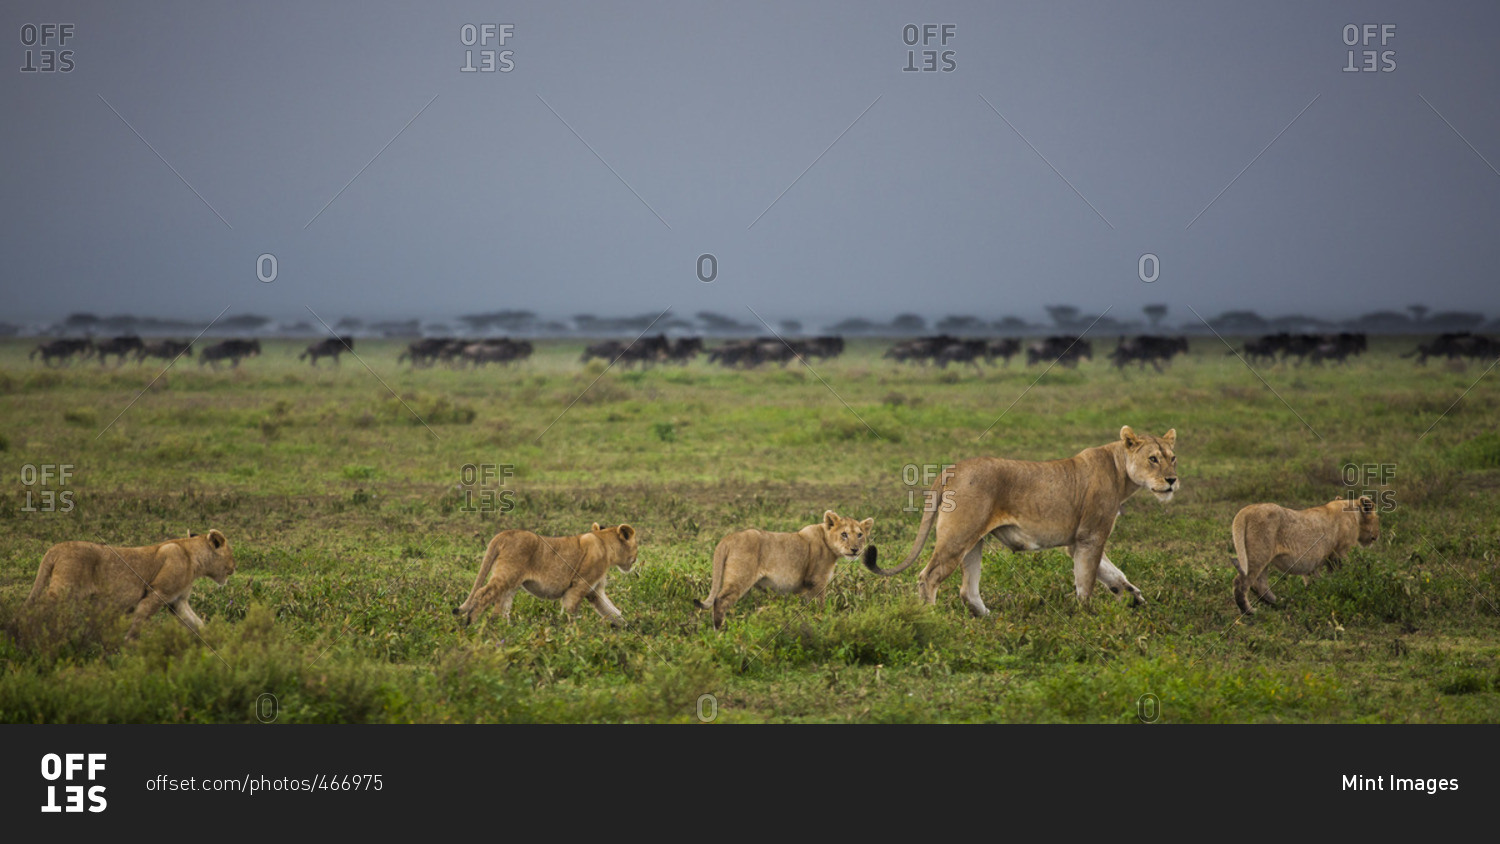 Lion and cubs crossing the grassland in the Serengeti National Park, Tanzania